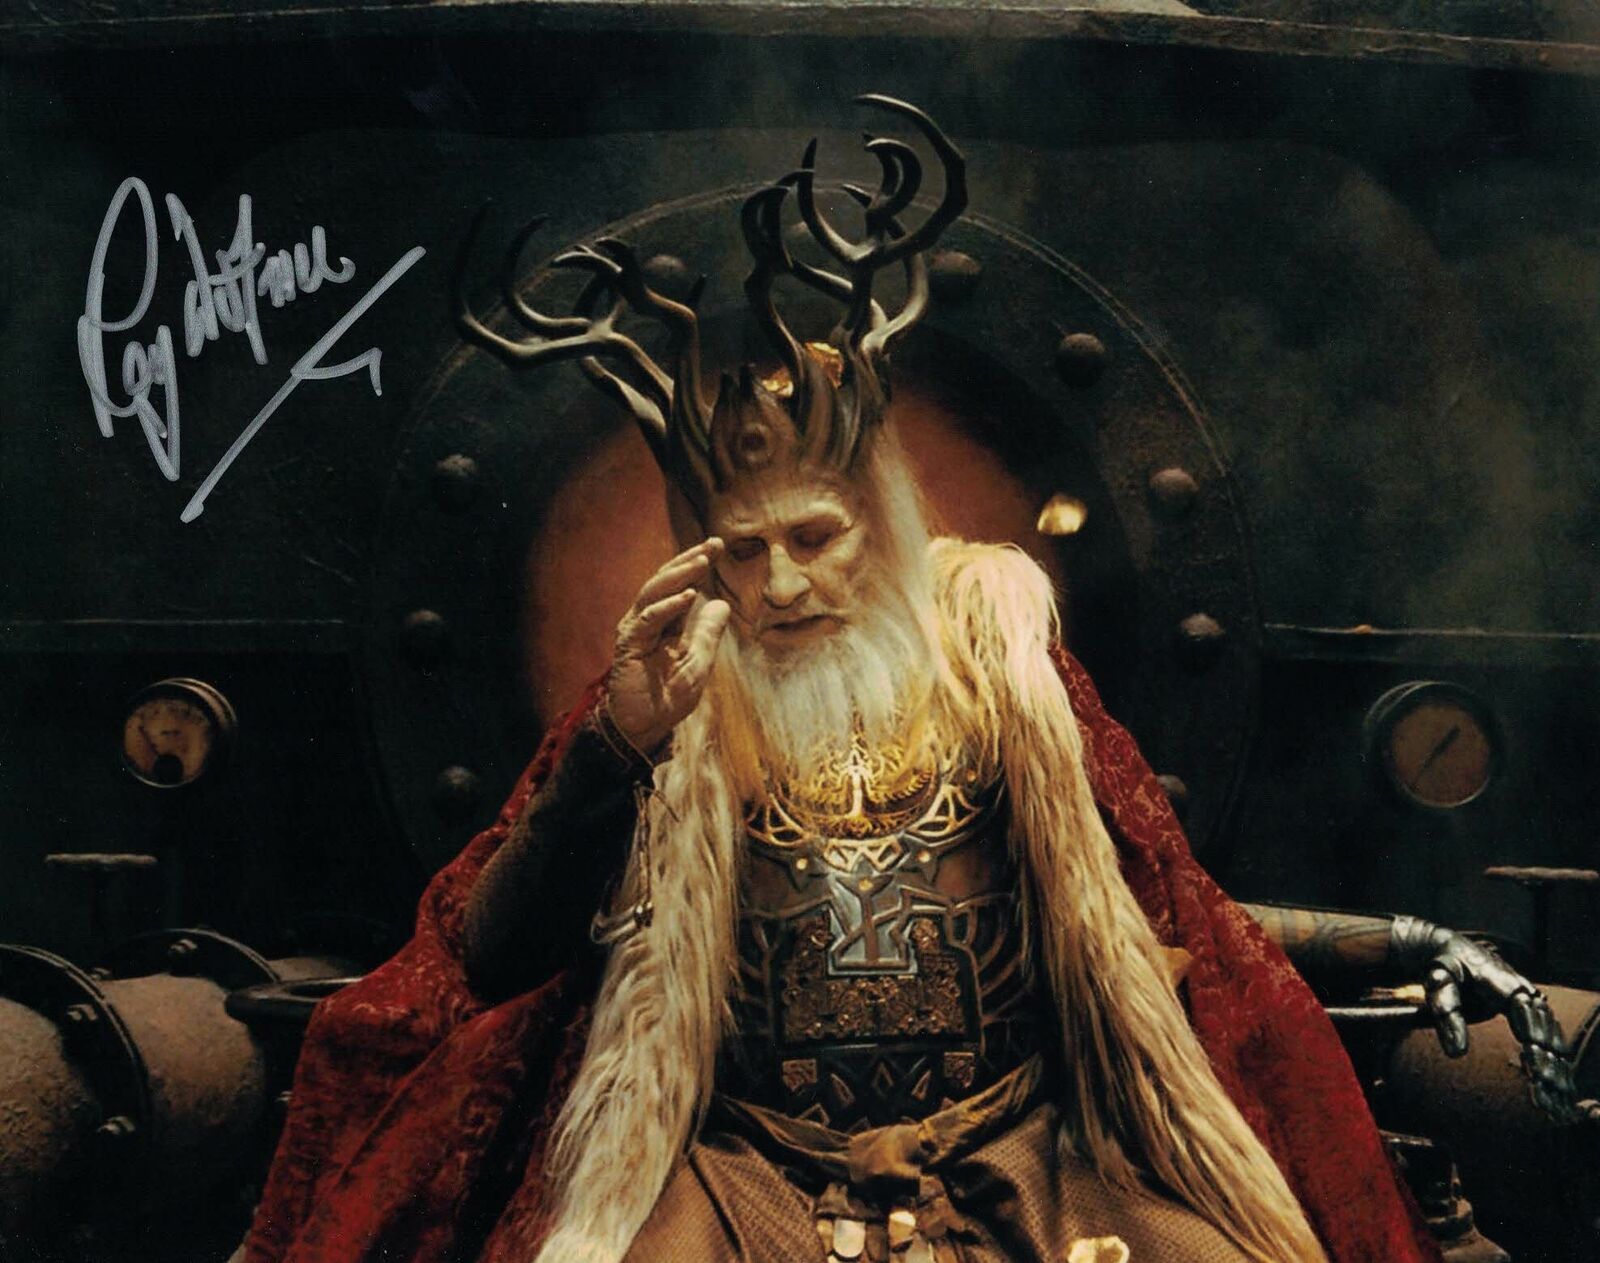 ROY DOTRICE - King Balor - Hellboy 2 - hand signed 10 x 8 Photo Poster painting